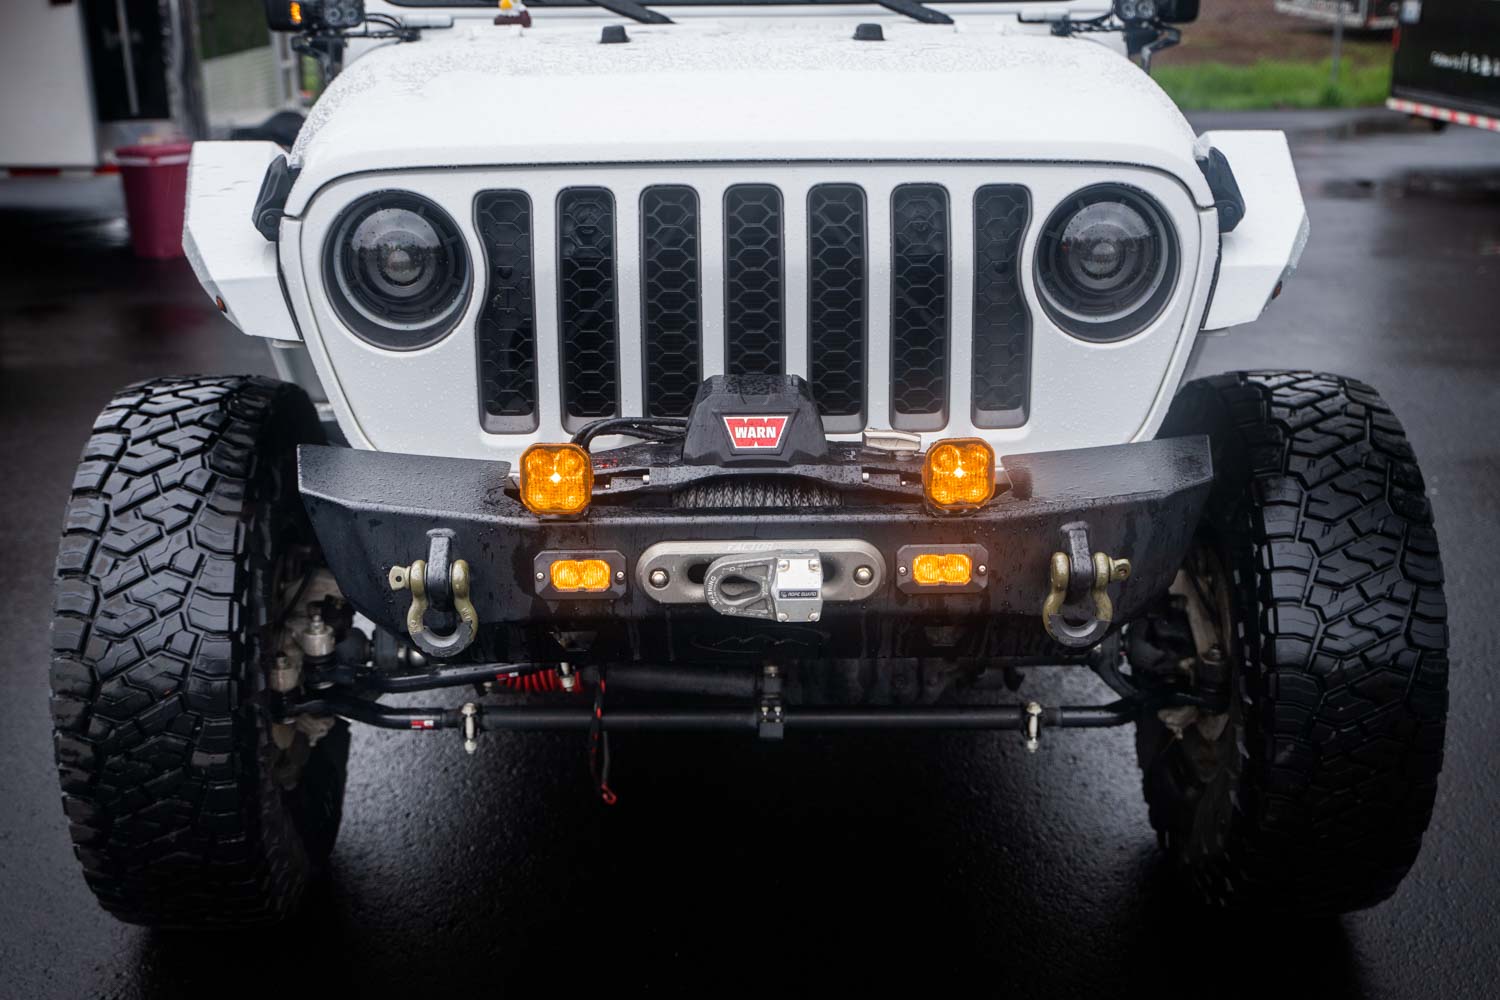 SSC2 LED Off-Road Lights On a Jeep Gladiator